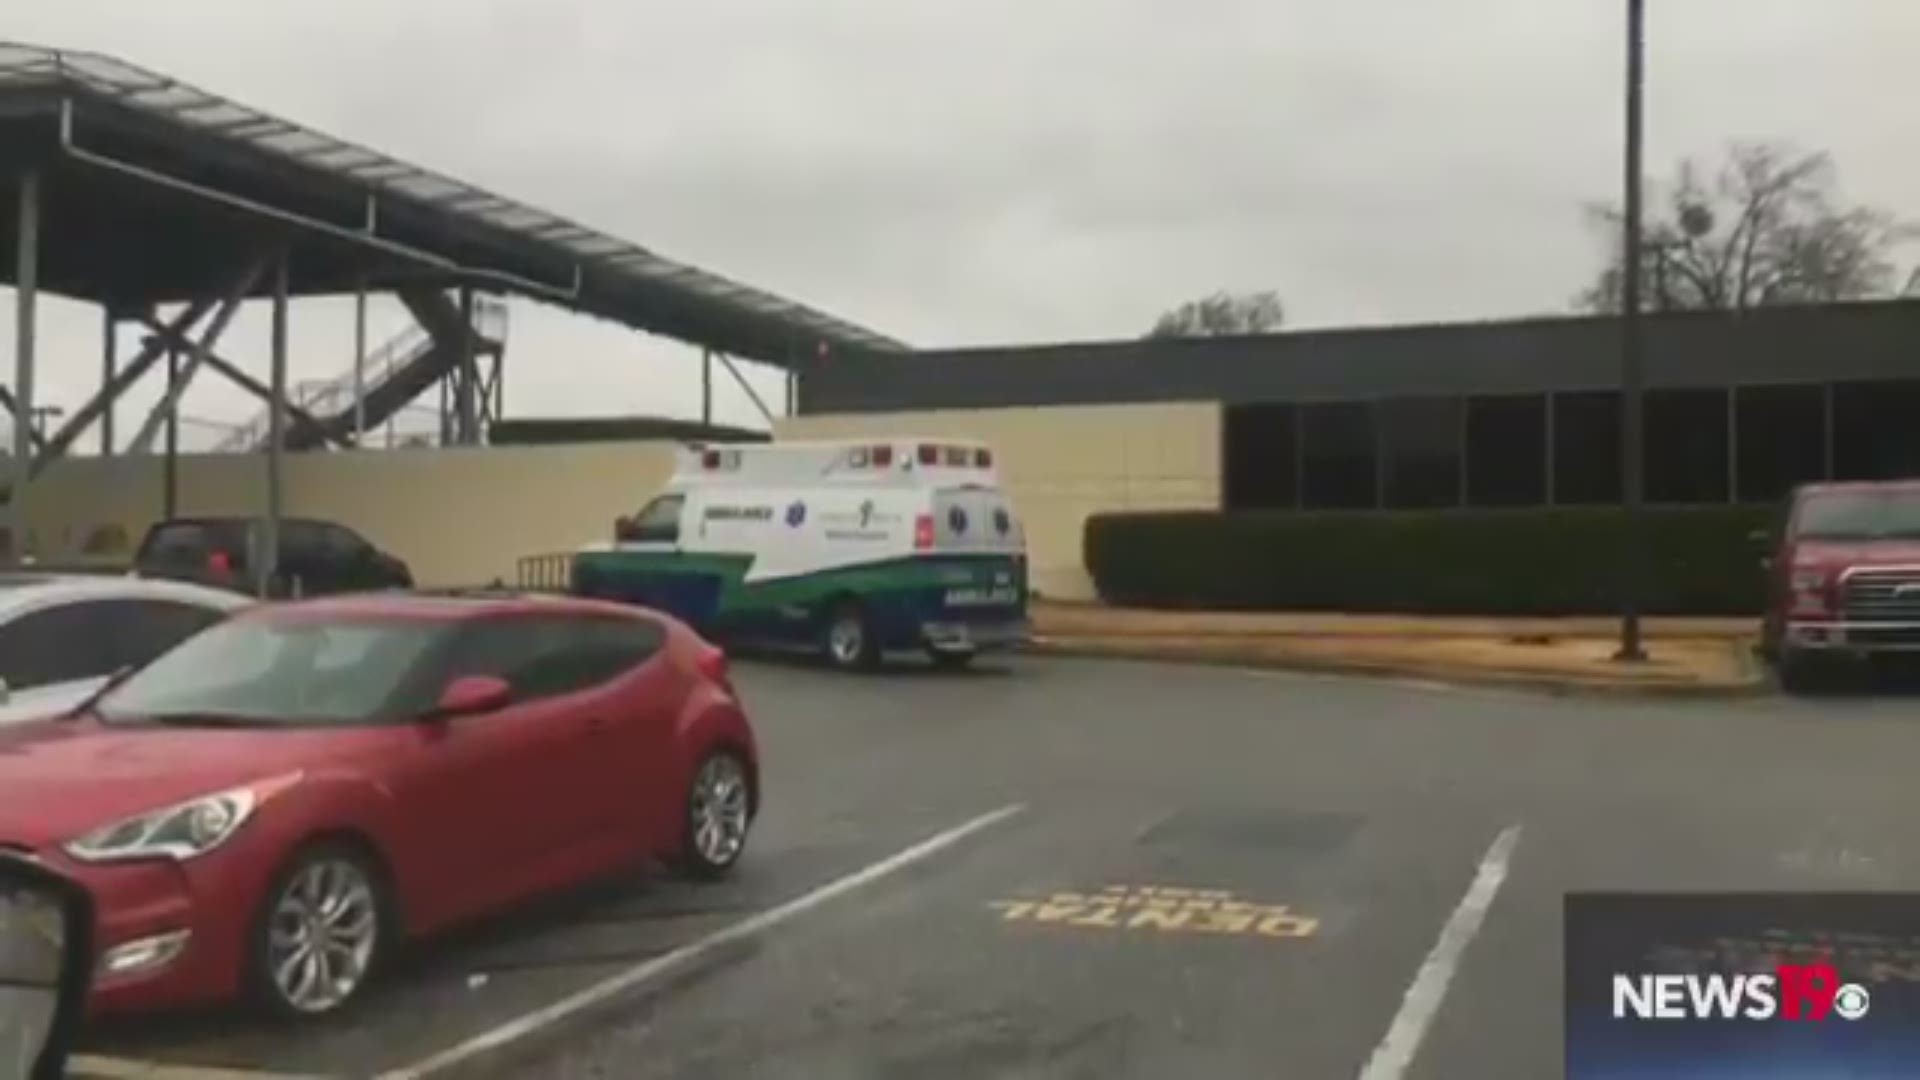 Palmetto Health hospitals have received Amtrak crash passengers for treatment, including two children.